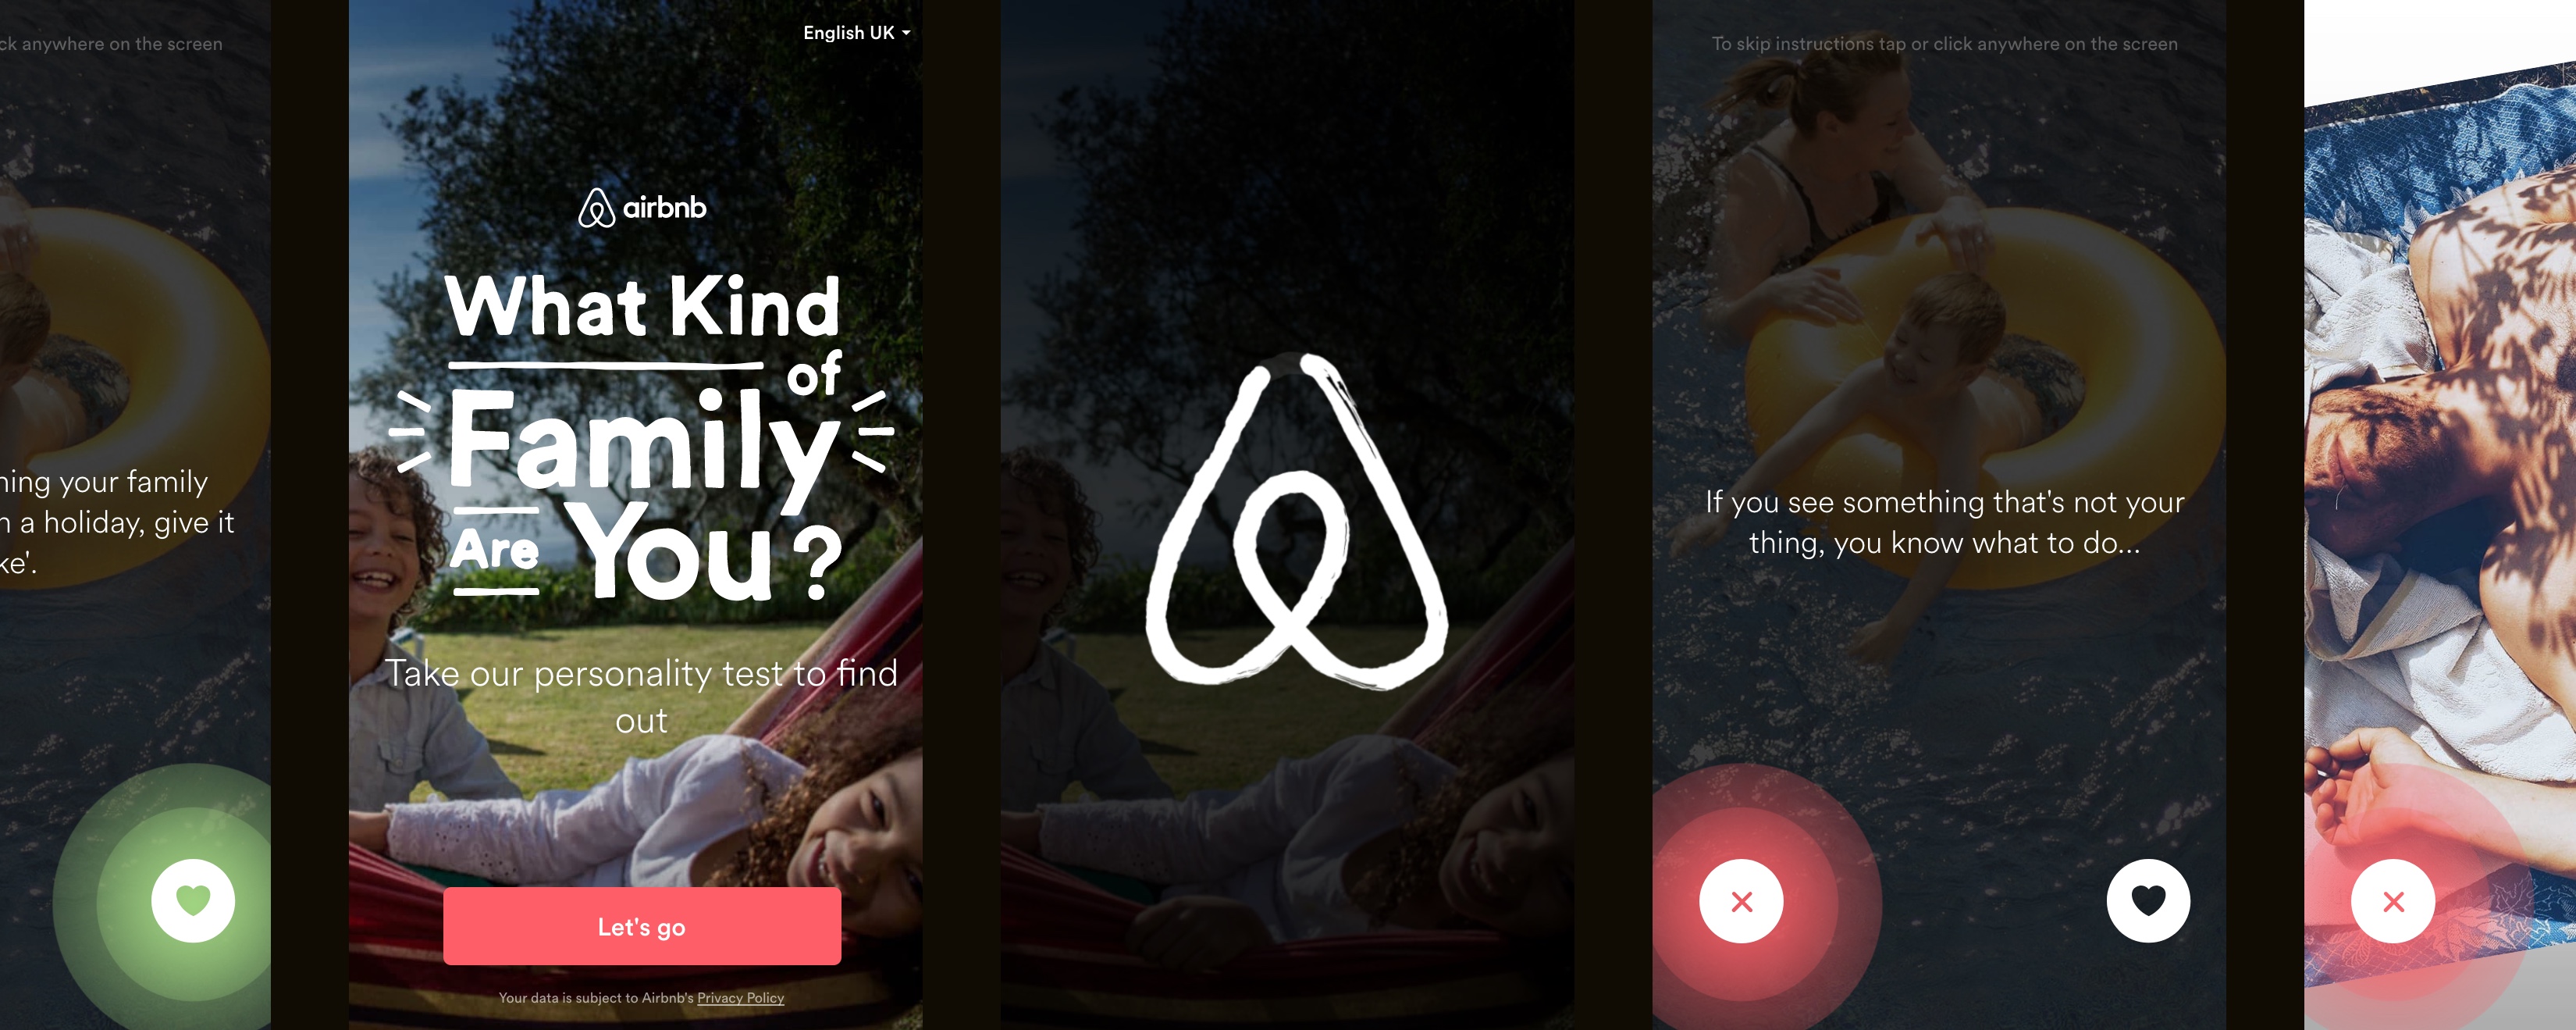 airbnb13—mobile1